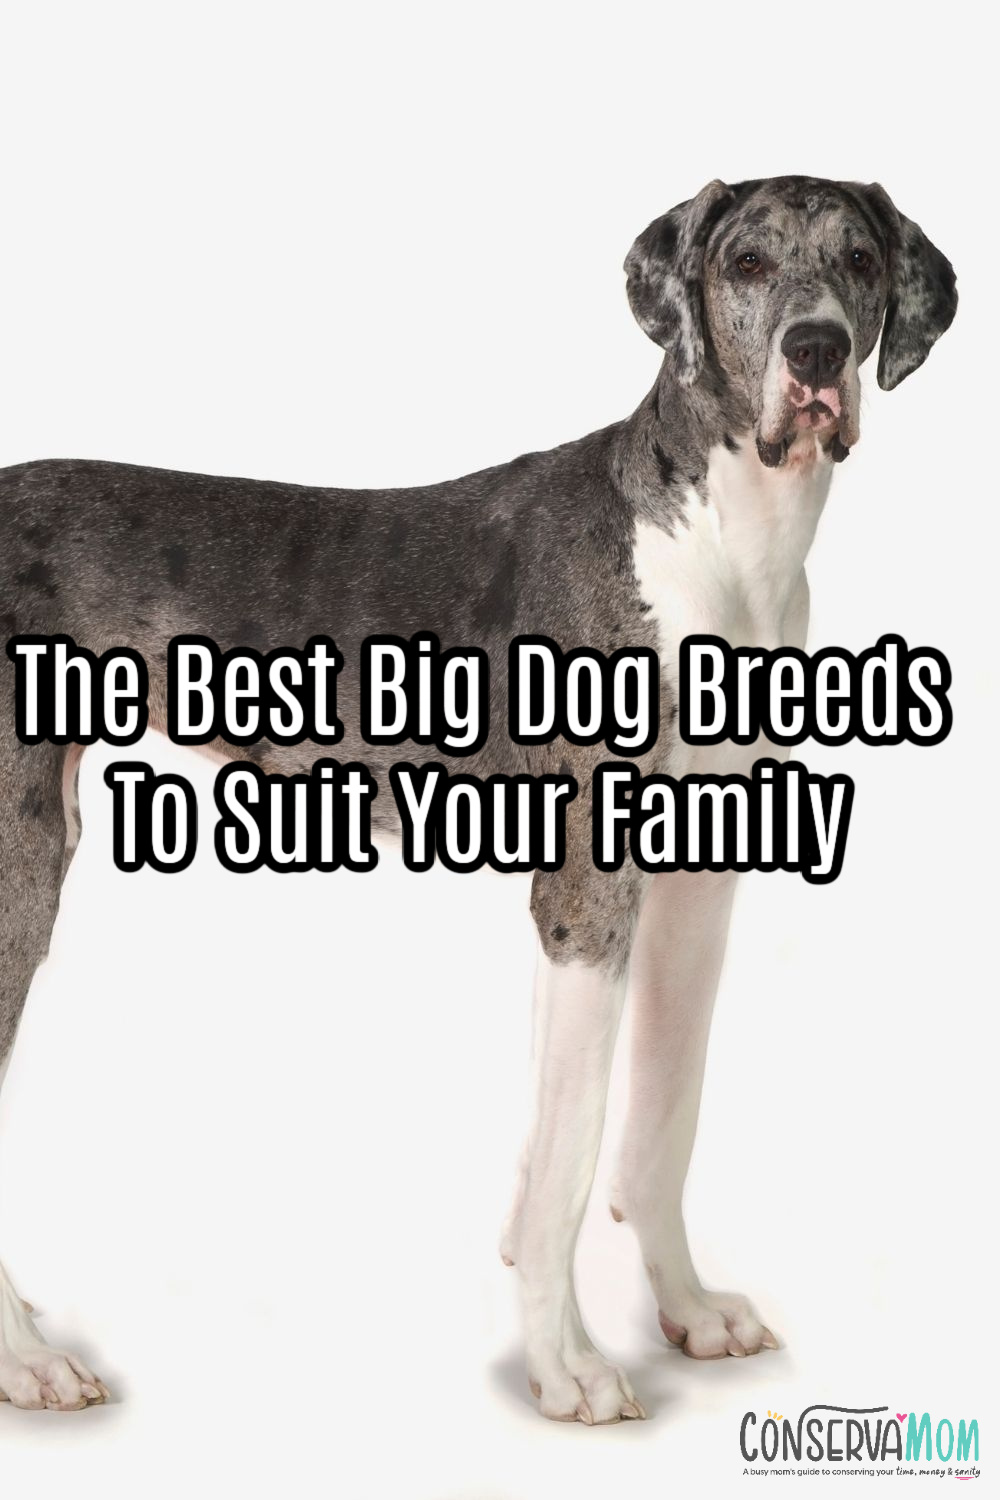 The Best Big Dog Breeds To Suit Your Family